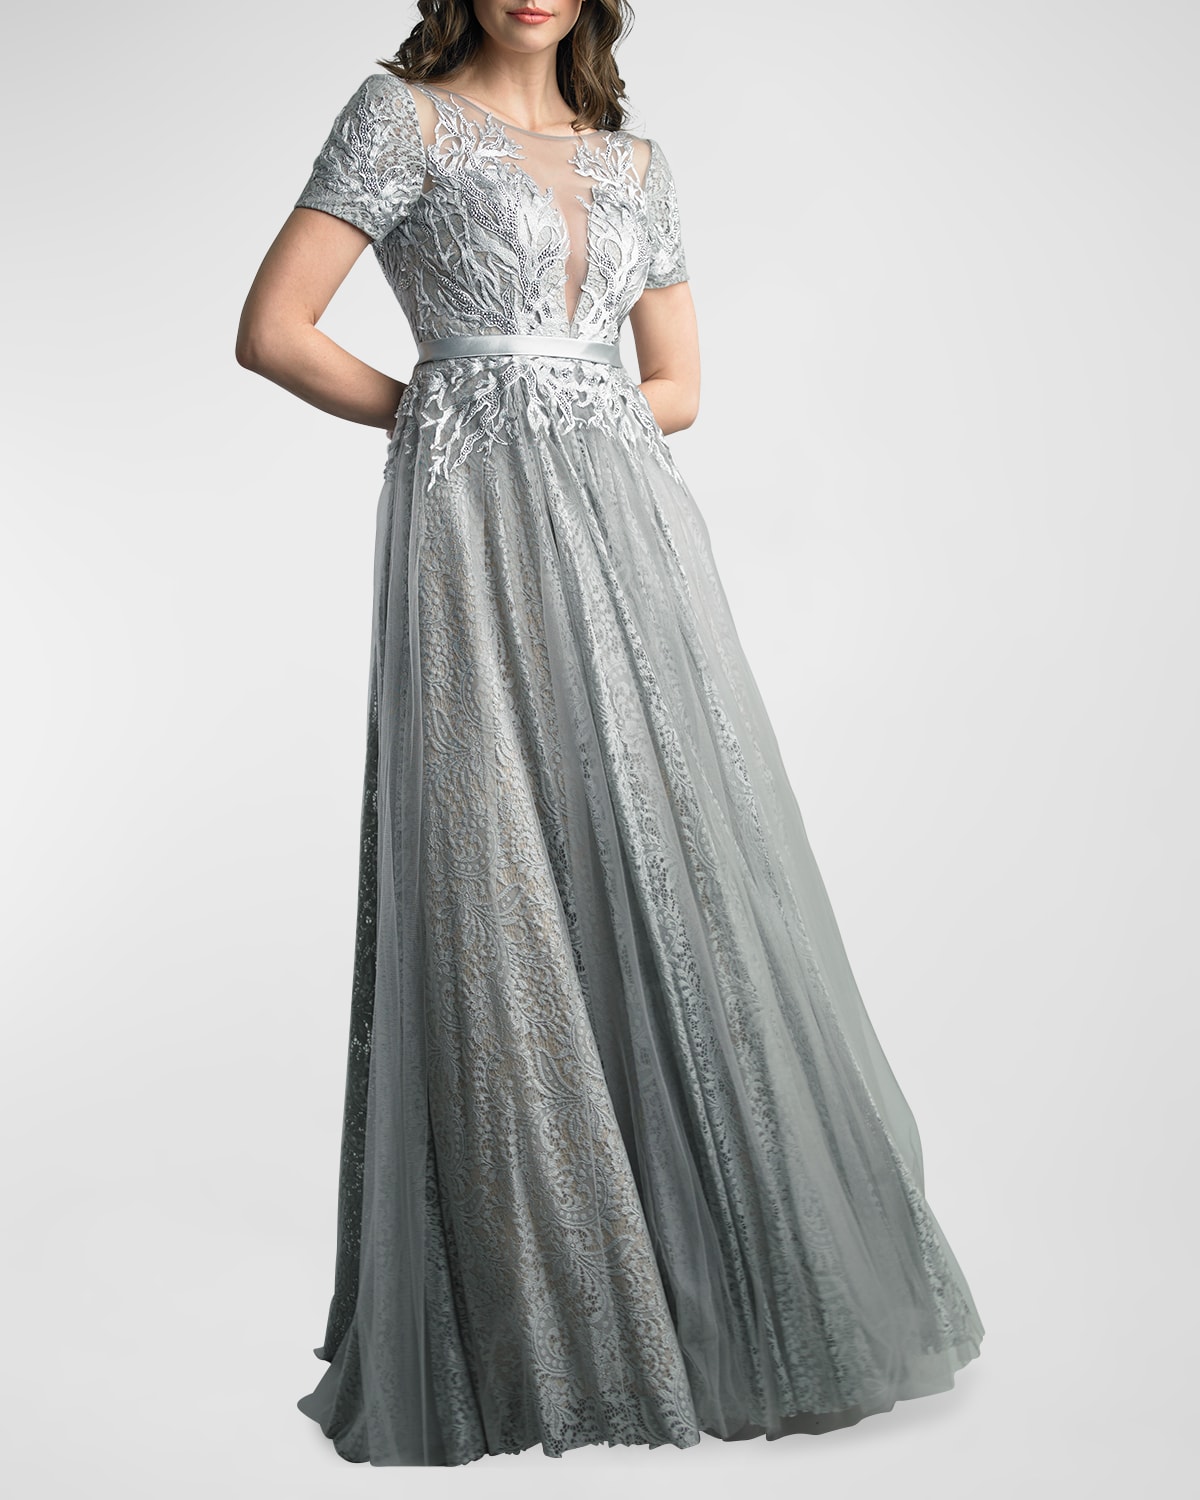 Basix Short-sleeve Burnout Lace Gown In Silver